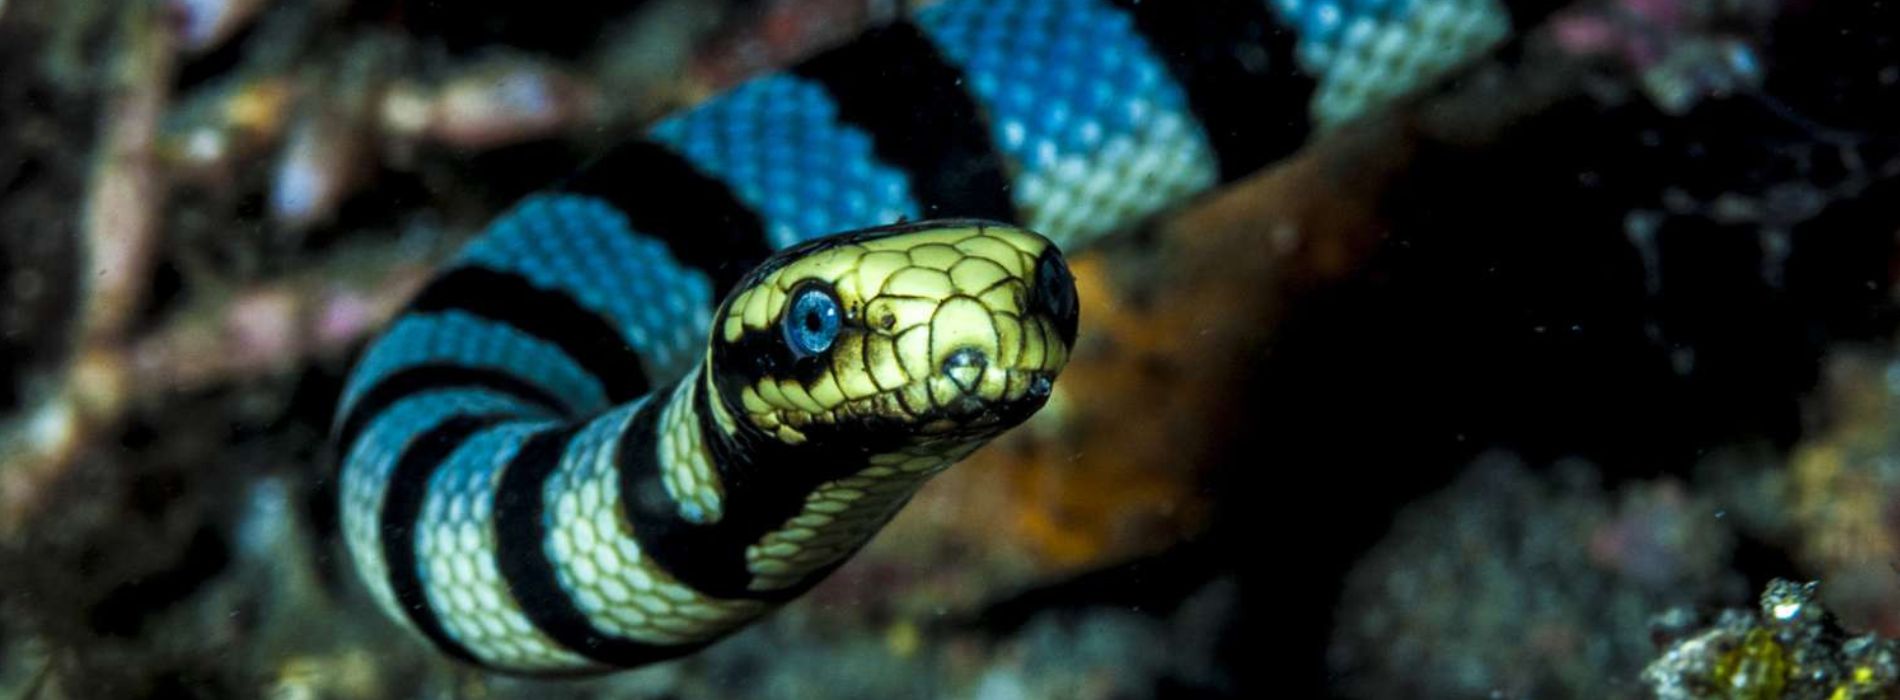 Sea Snakes: The Fascinating Creatures of the Ocean - Madeinsea©